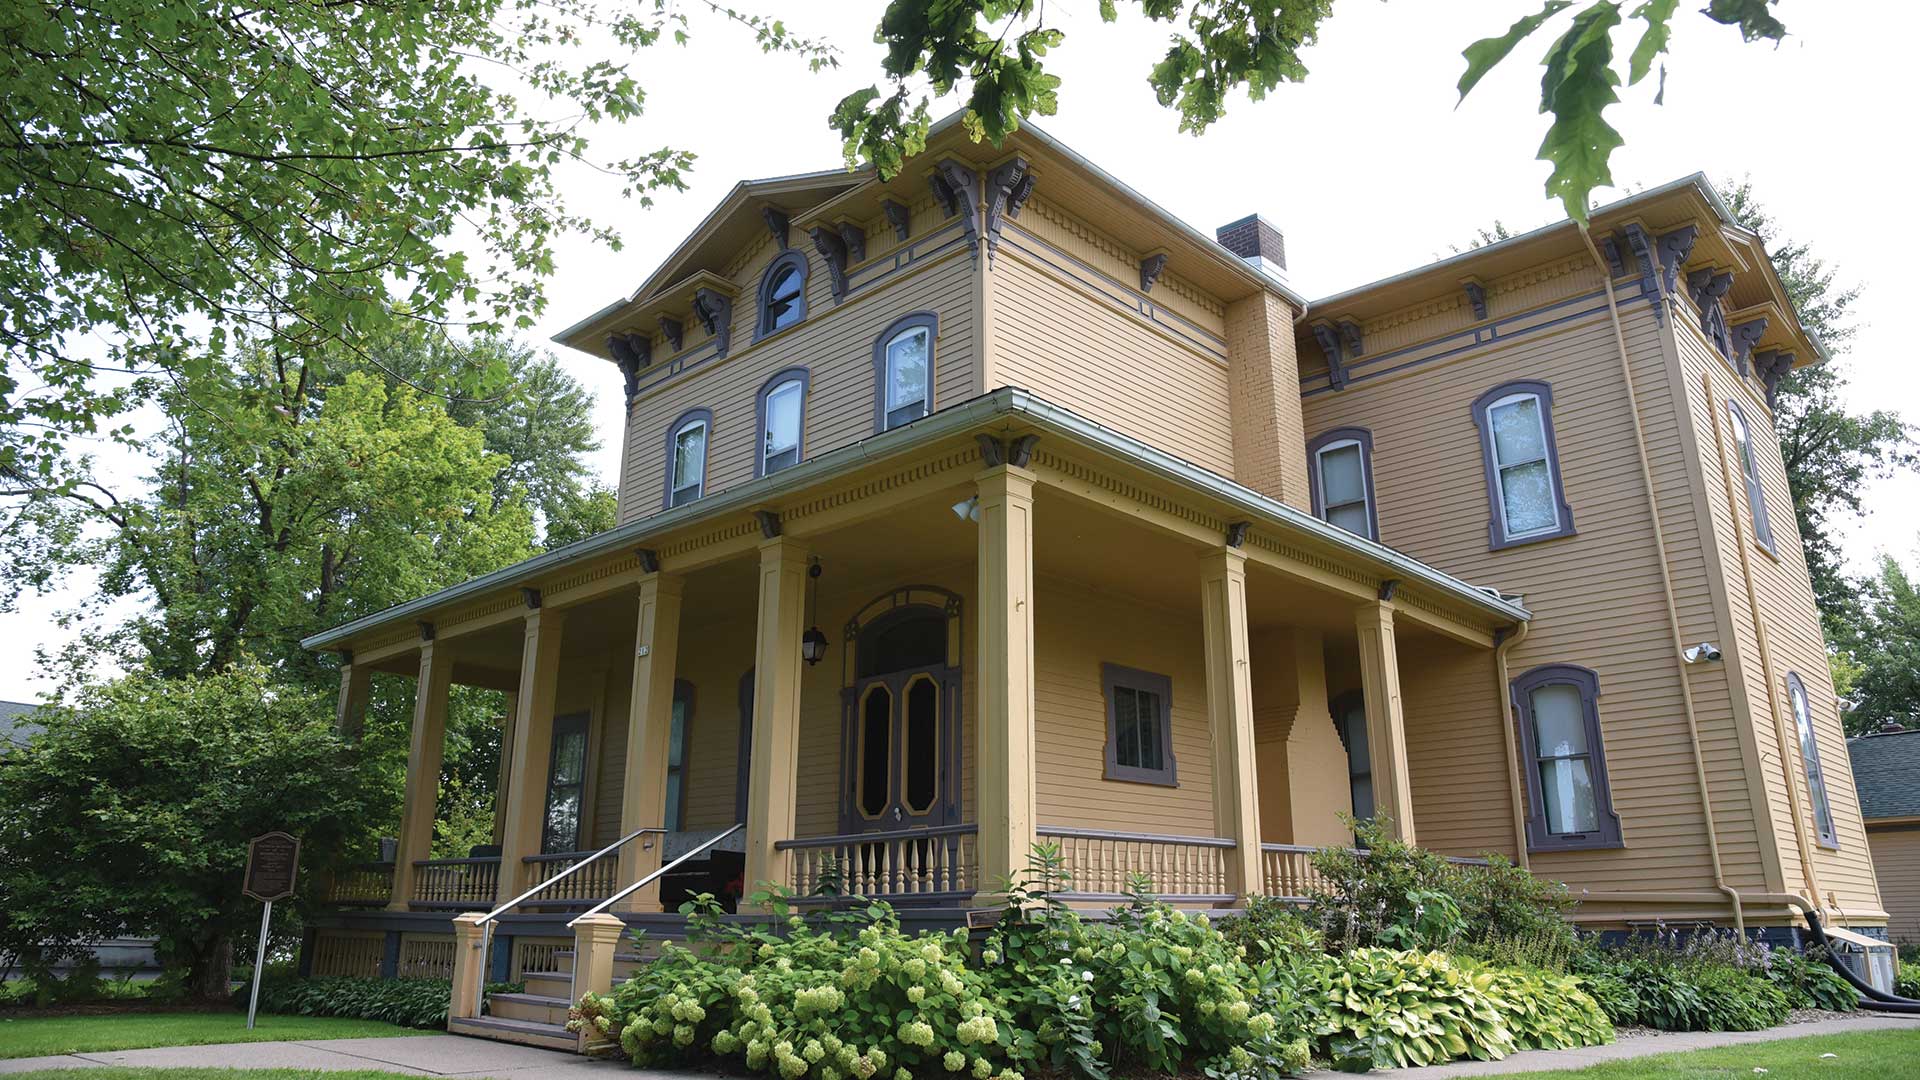 All about the Upham Mansion | Upham Mansion downtown in Marshfield, WI